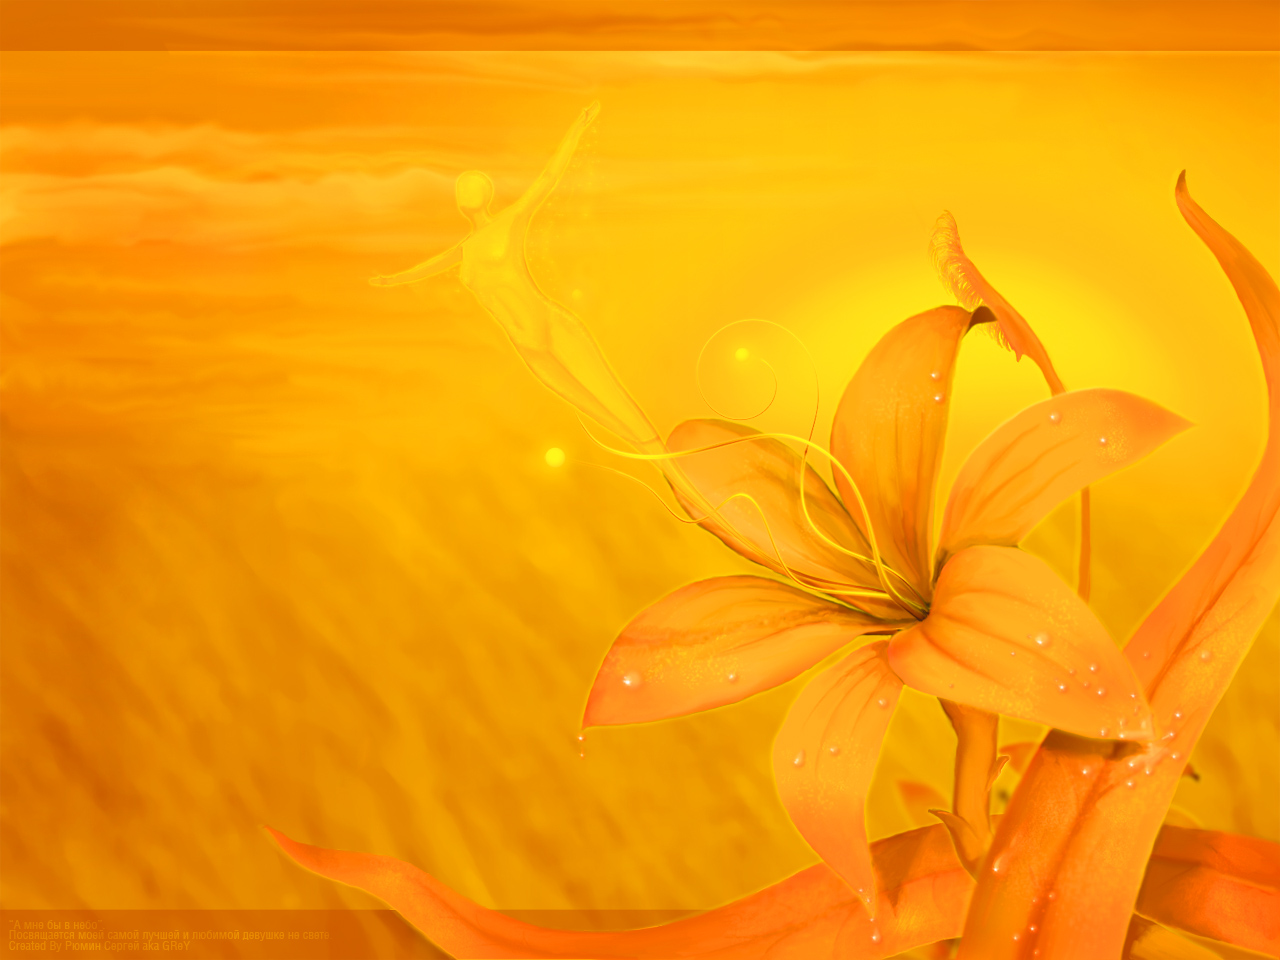 Yellow Flower Texture 5508 Hd Wallpaper Pictures | Top Background ...